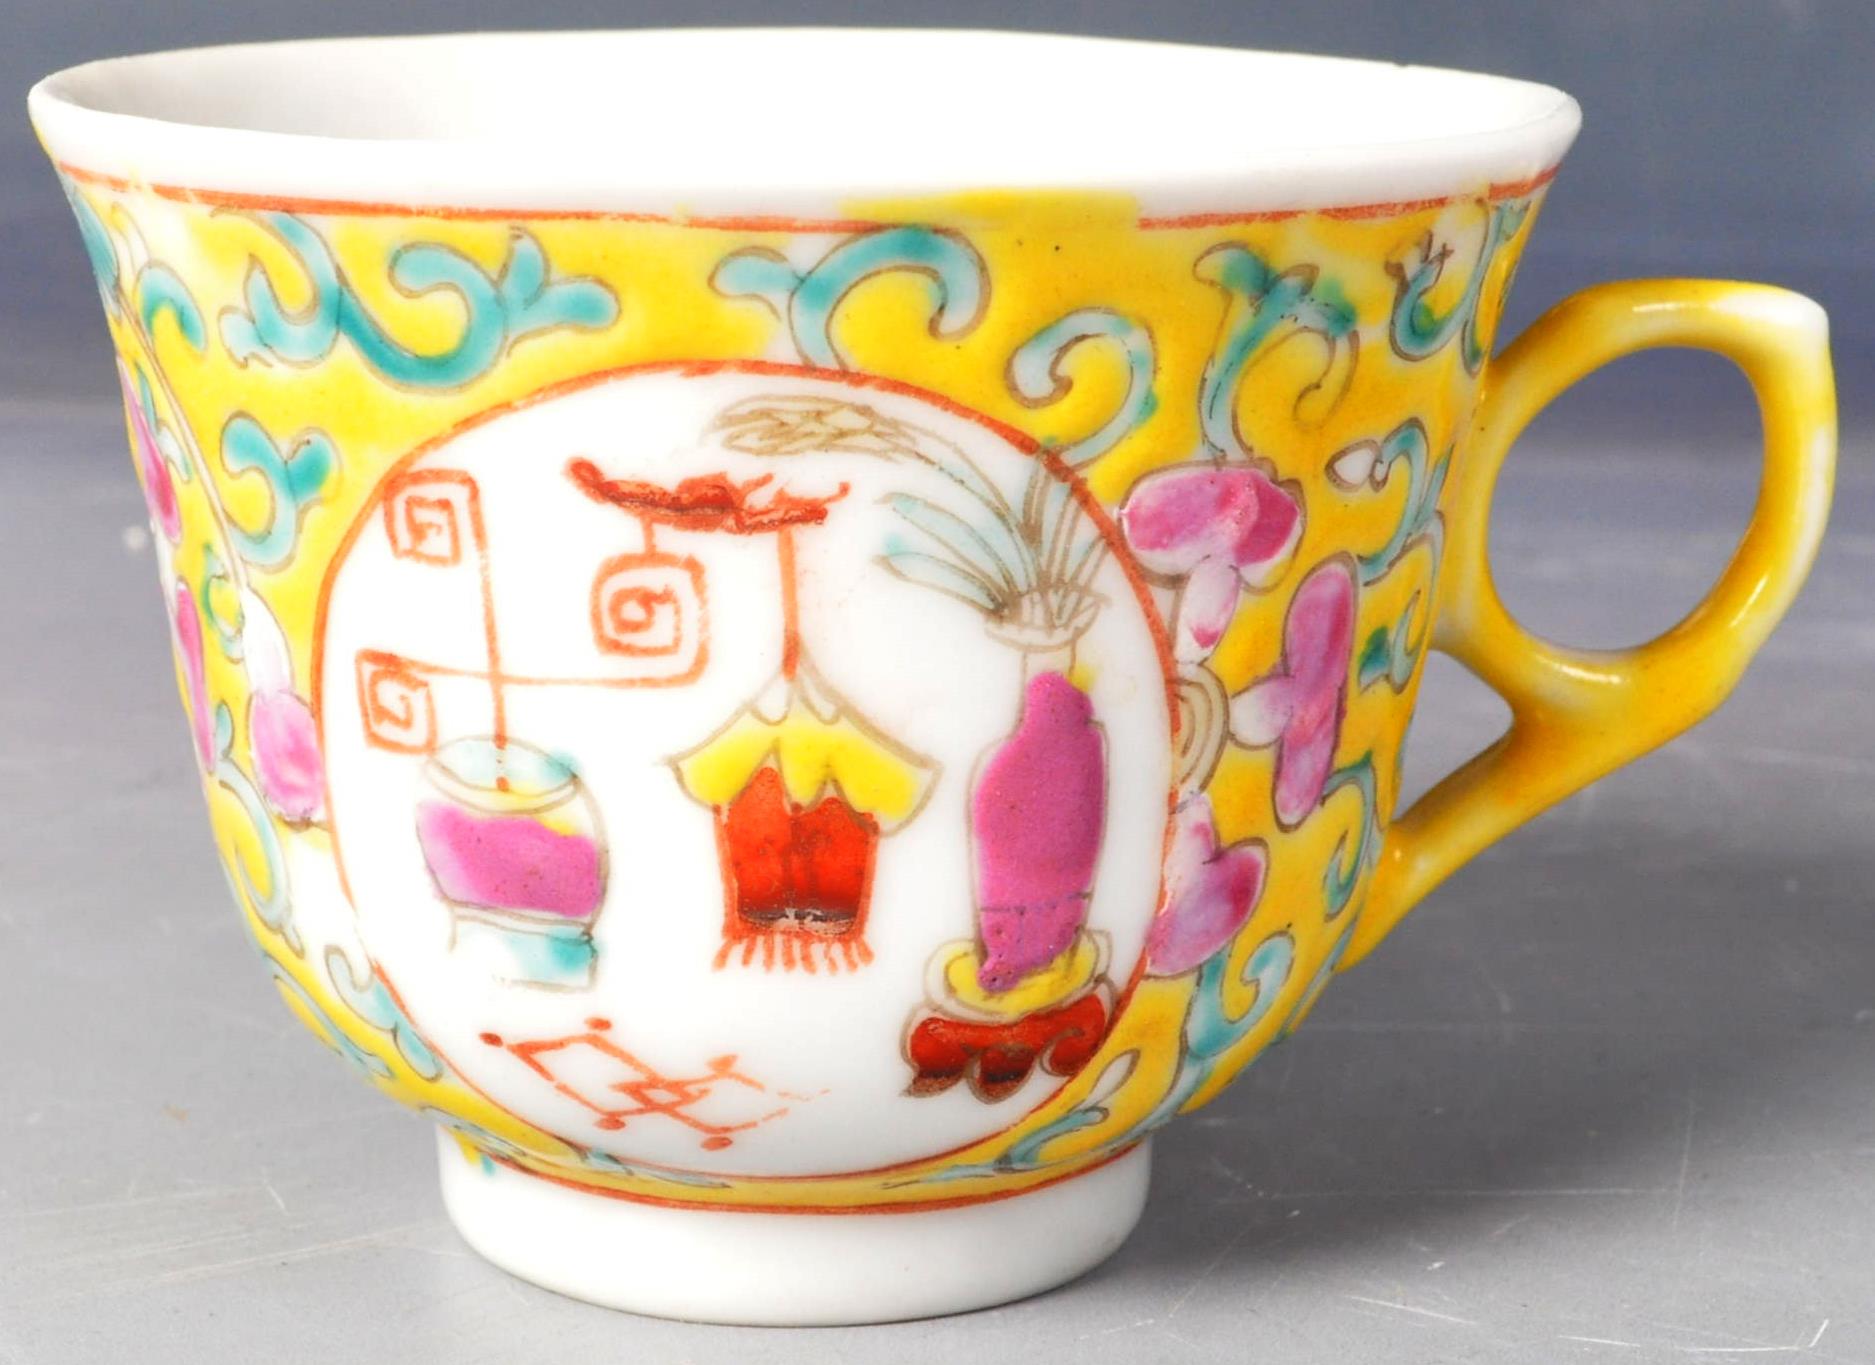 EARLY 20TH CENTURY CHINESE PORCELAIN CUP & SAUCER - Image 7 of 9